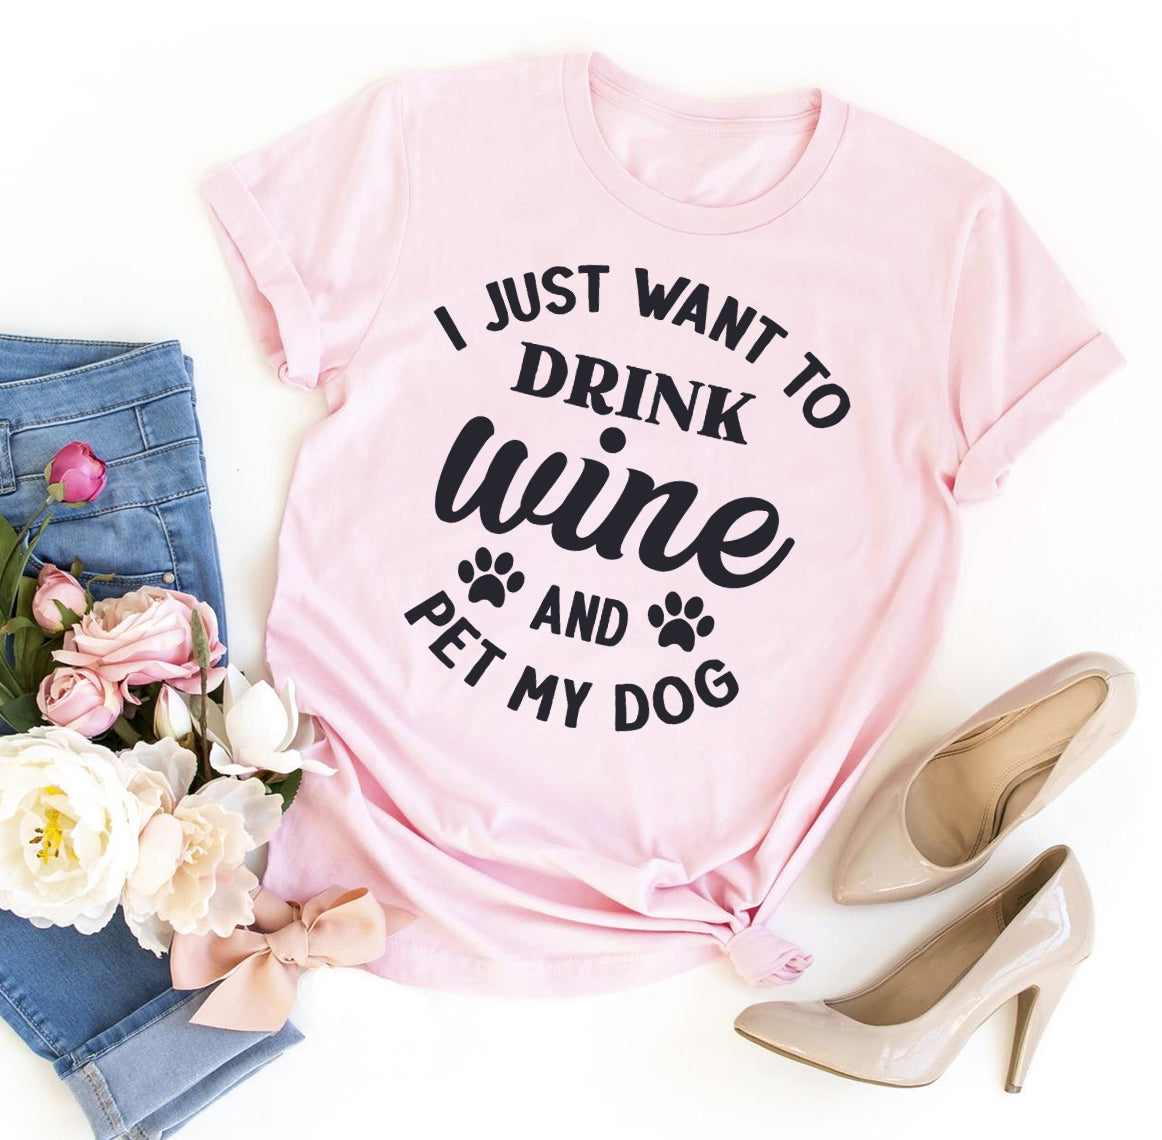 I Just Want To Drink Wine And Pet My Dog T-shirt